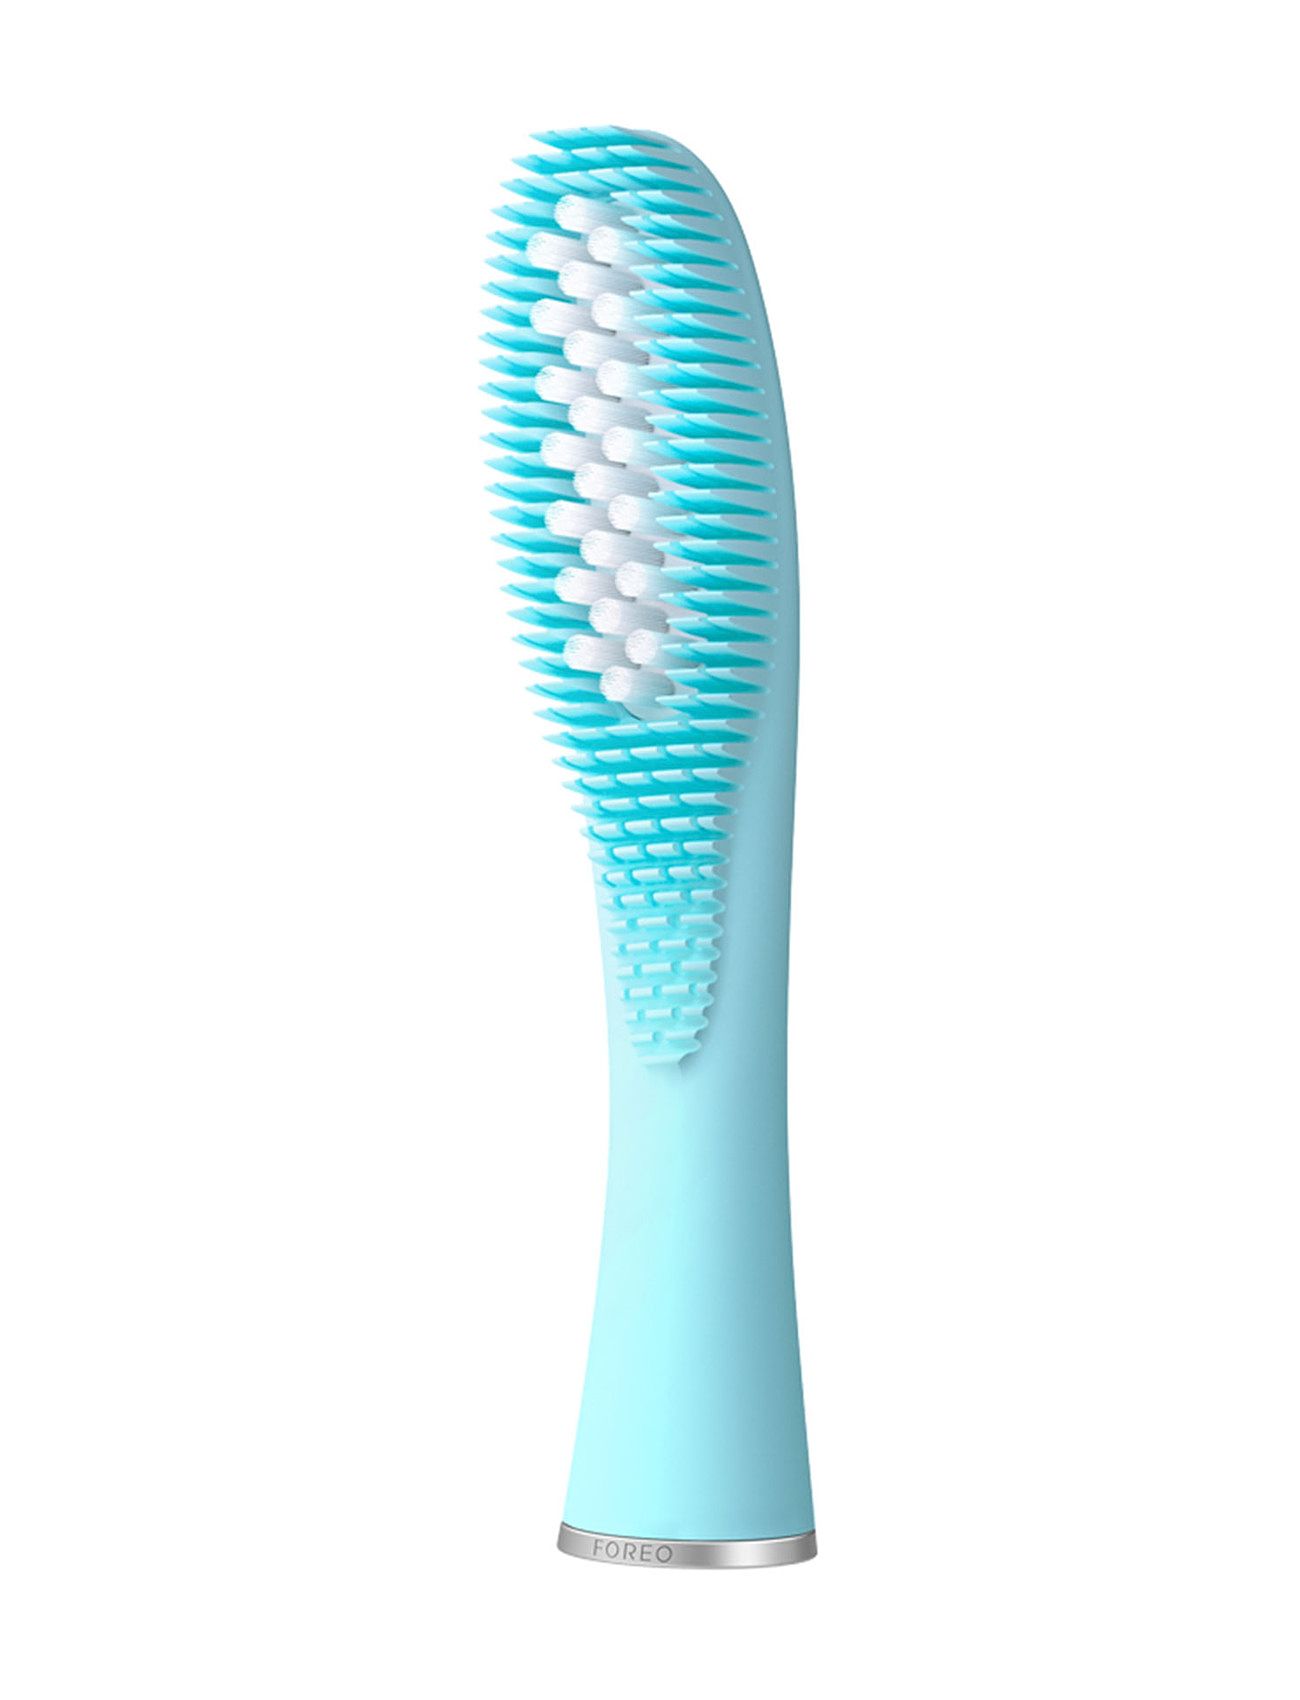 Issa™ Hybrid Wave Brush Head Mint Beauty Women Home Oral Hygiene Toothbrushes Blue Foreo